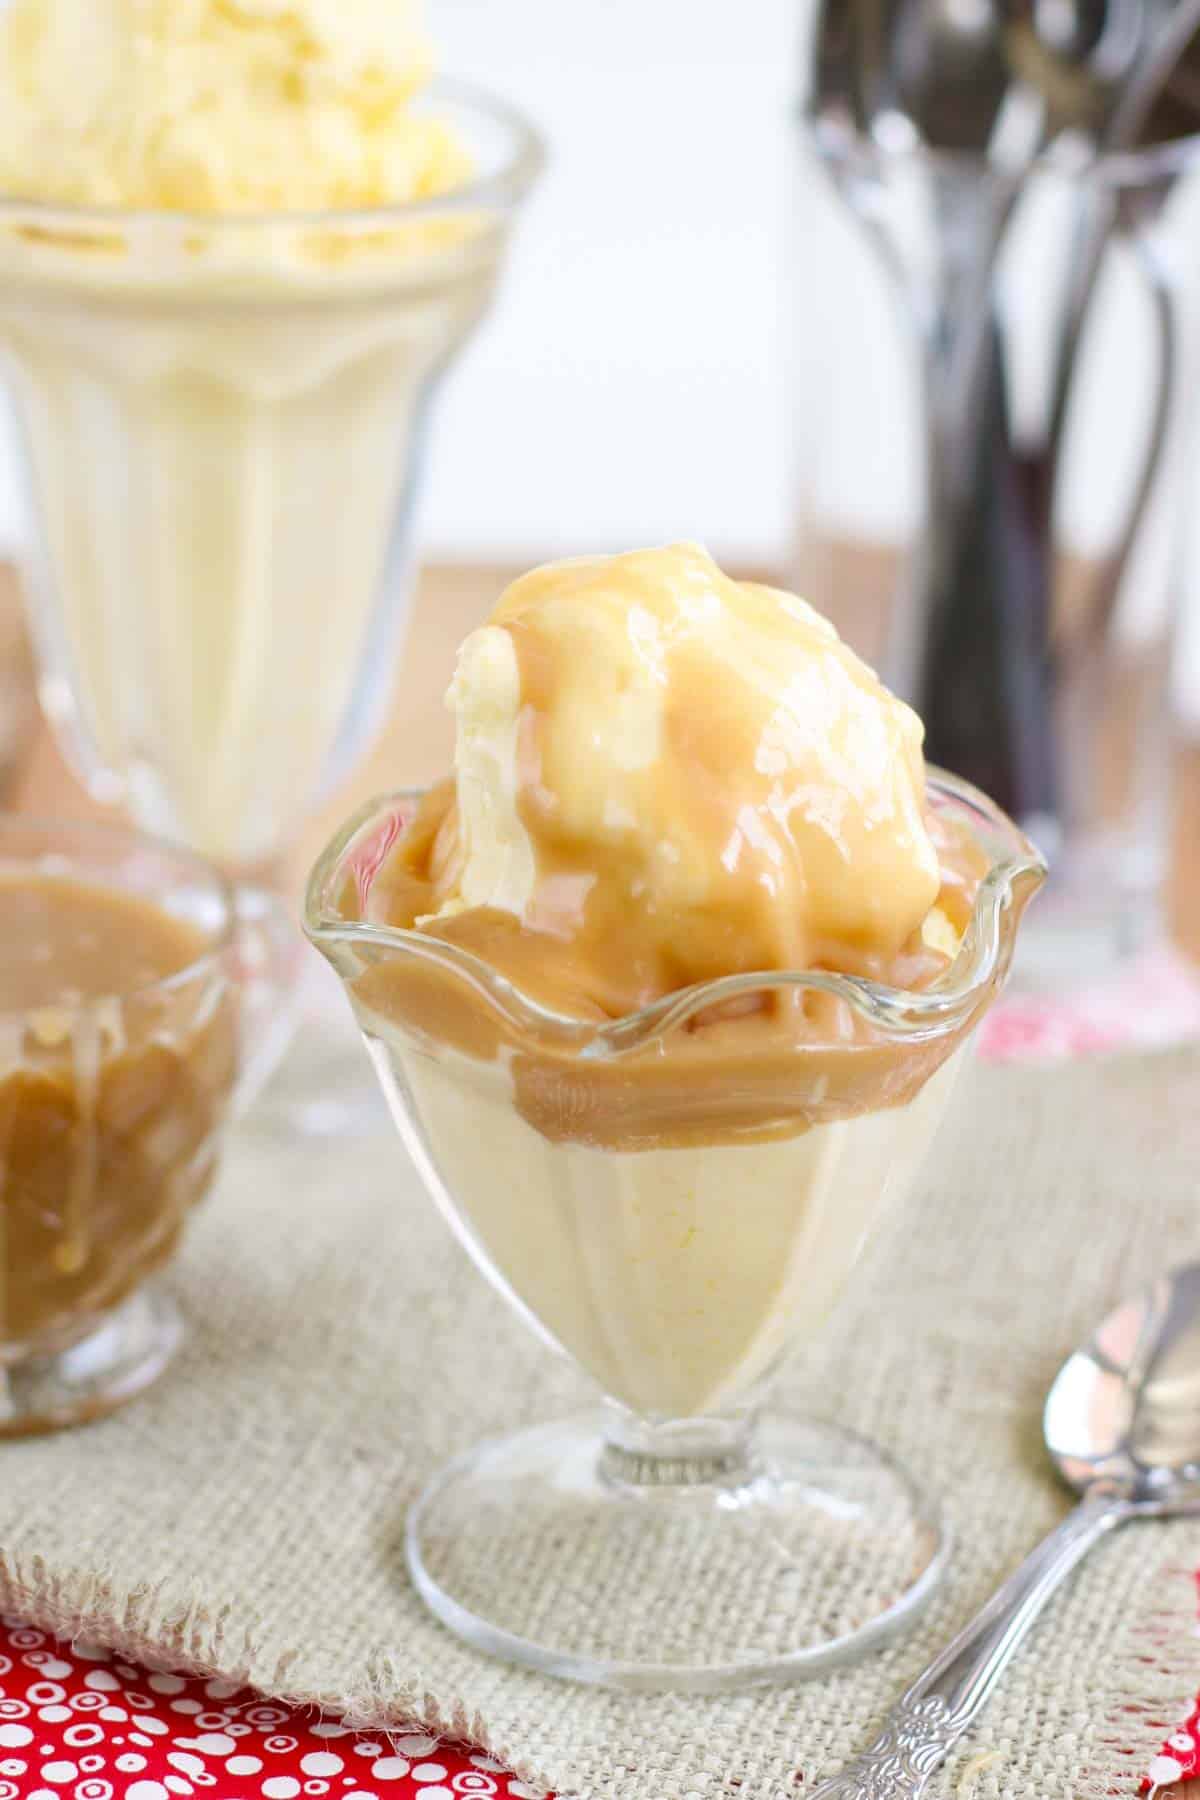 Sweet Corn Ice Cream with salted caramel sauce poured over the top.